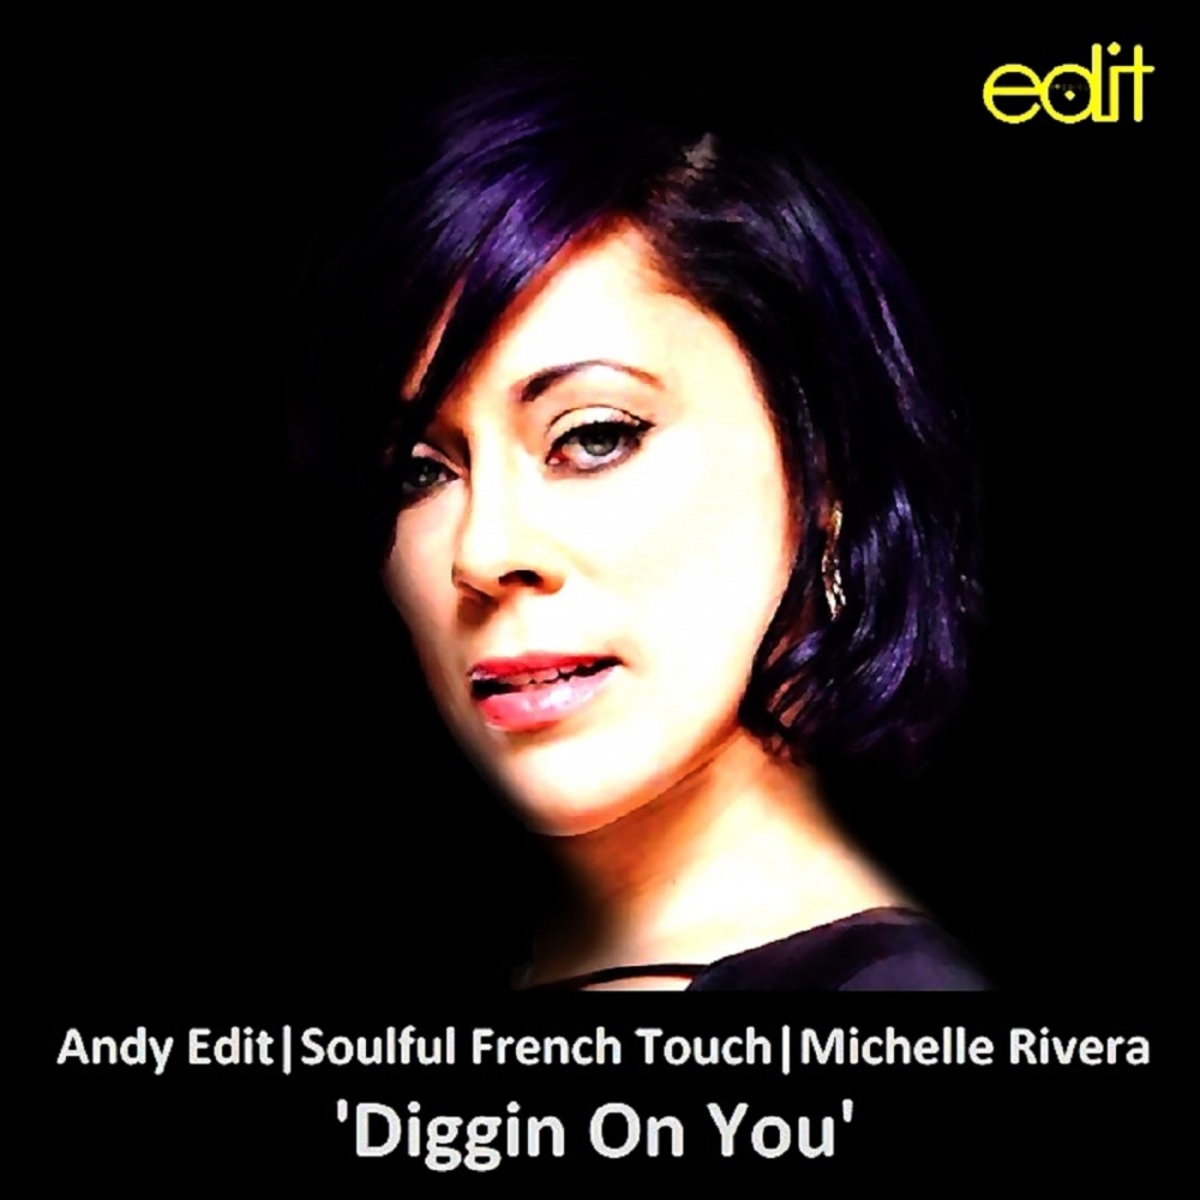 Andy Edit, Soulful French Touch, Michelle Rivera - Diggin On You / Edit Records